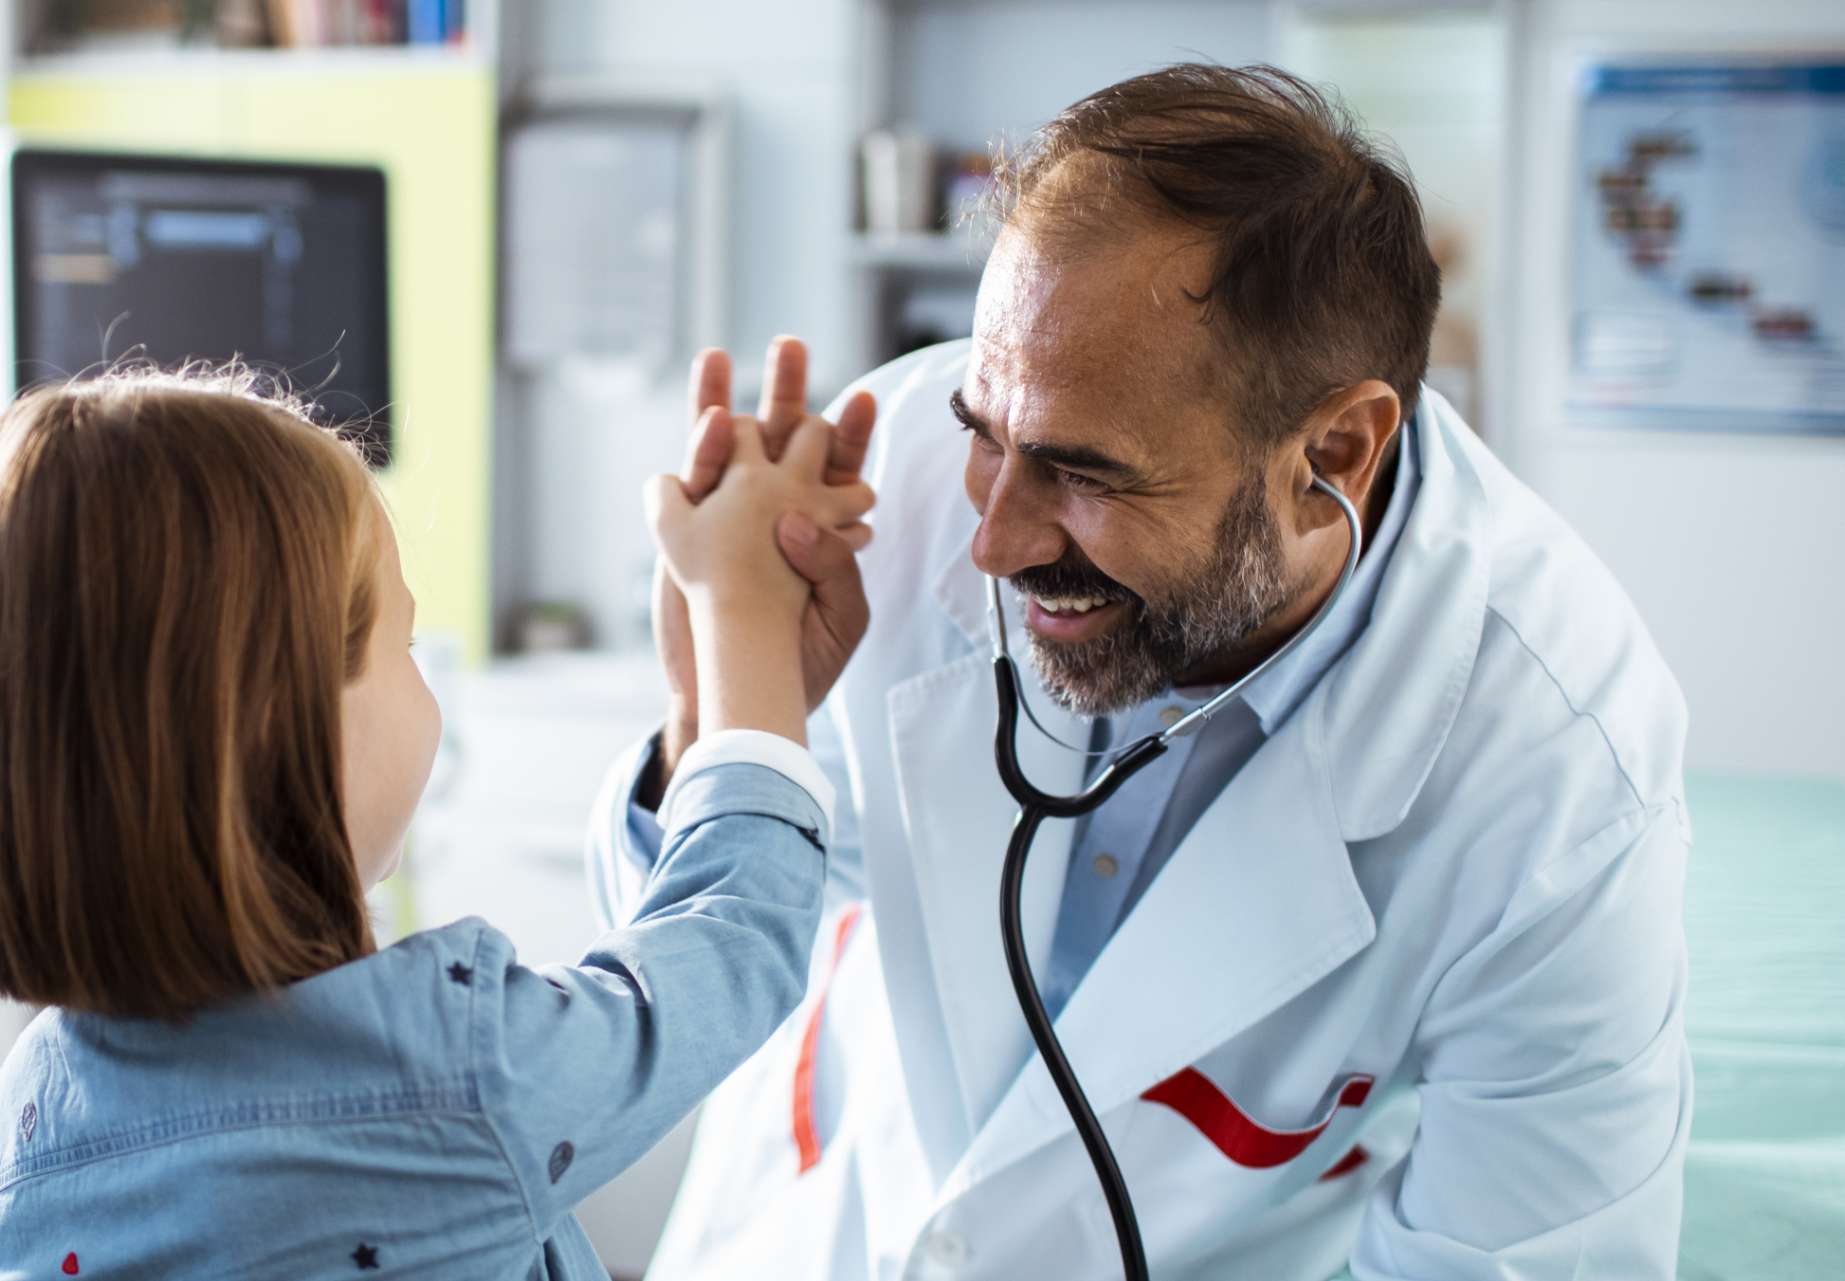 A pediatric orthopedic doctor high fiving a pret-een female patient in his office after discussing her progress using the Thinks Works brace for Adolescent Idiopathic Scoliosis (AIS)